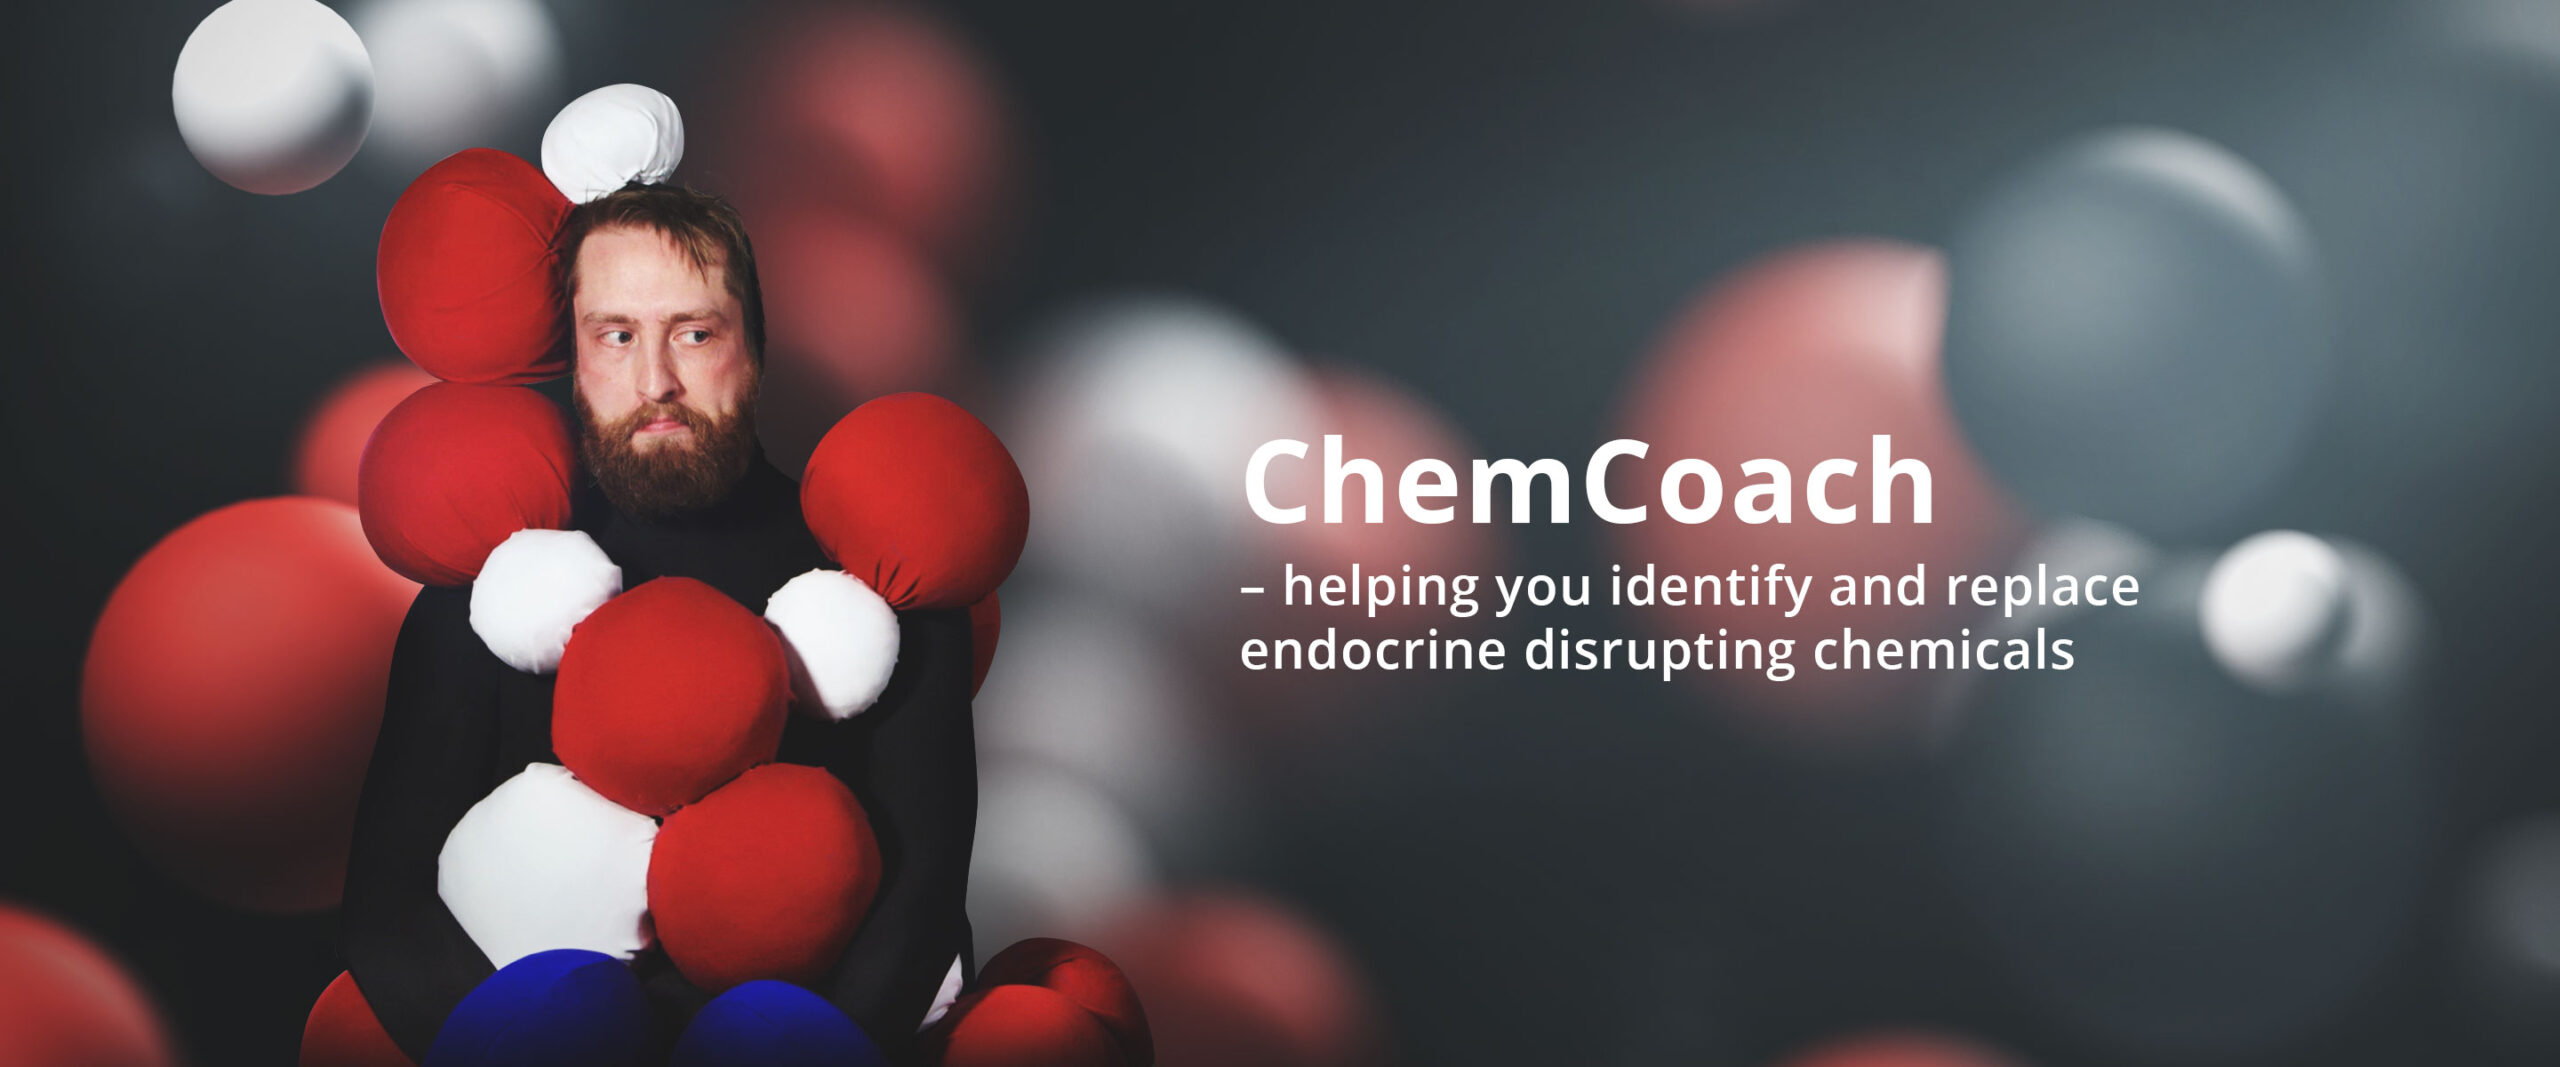 Welcome to ChemCoach!